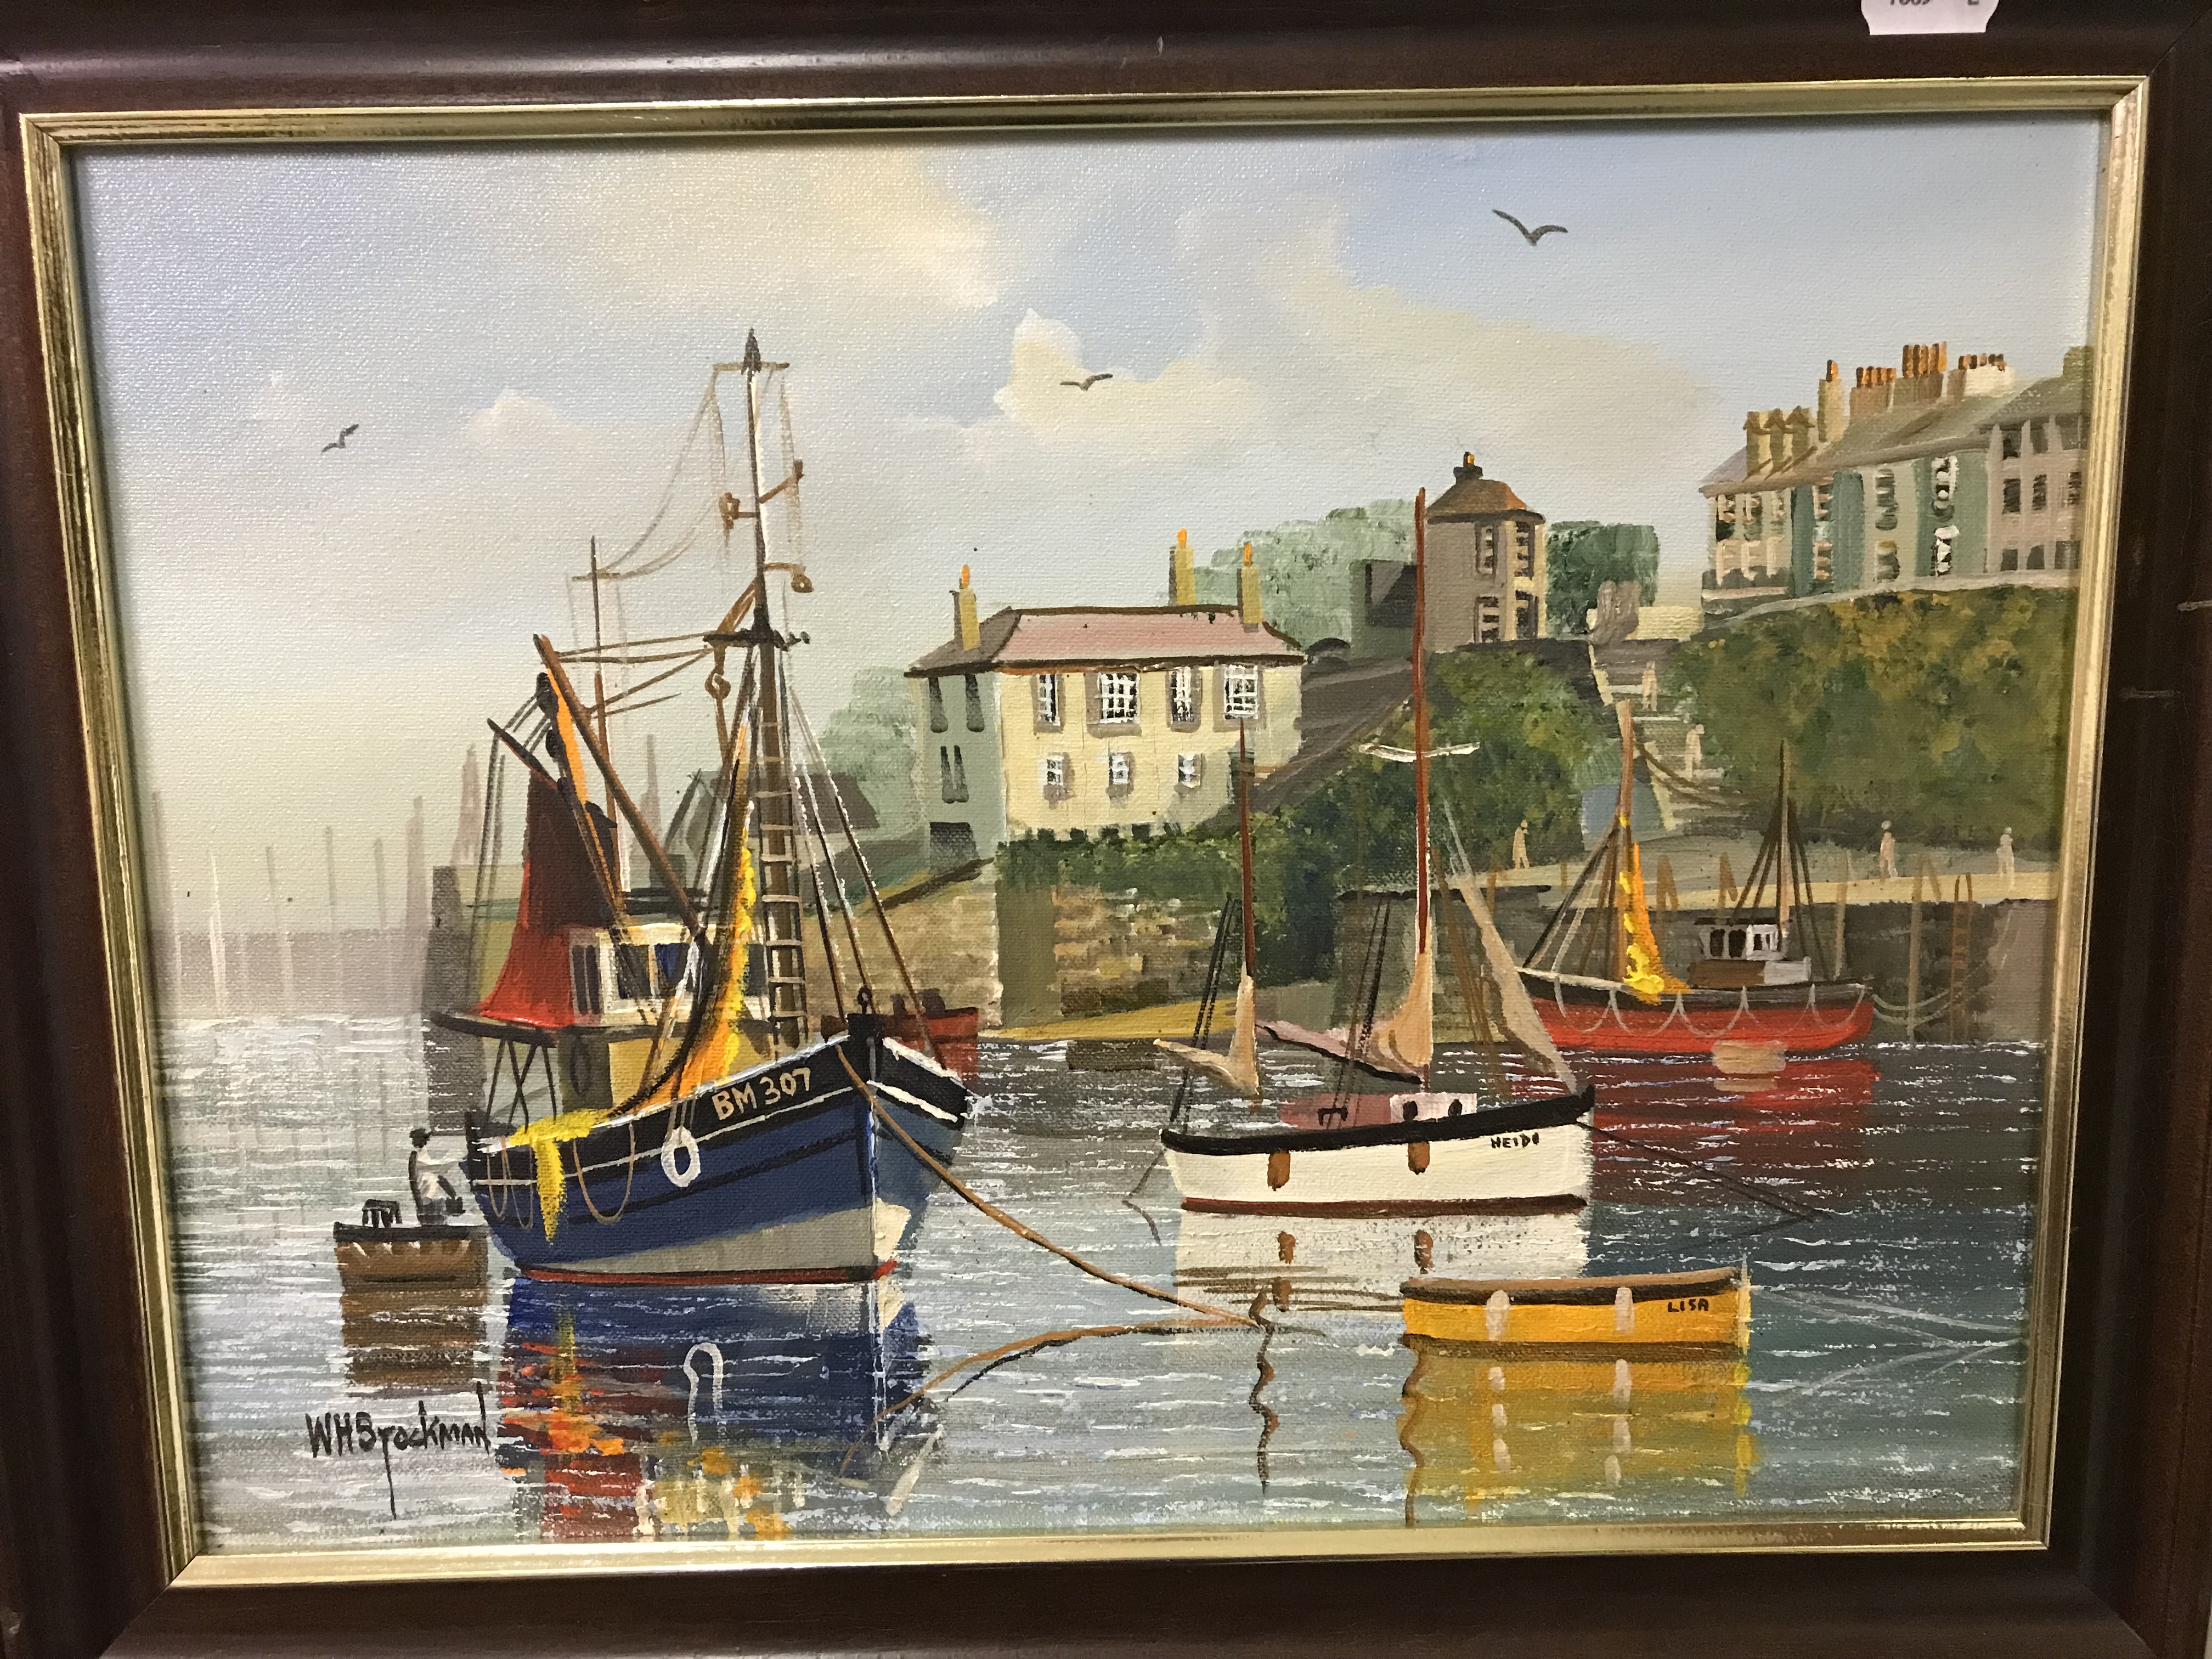 WILLIAM H STOCKMAN "Brixham Harbour" study of fishing vessels in harbour, oil on canvas, - Image 2 of 5